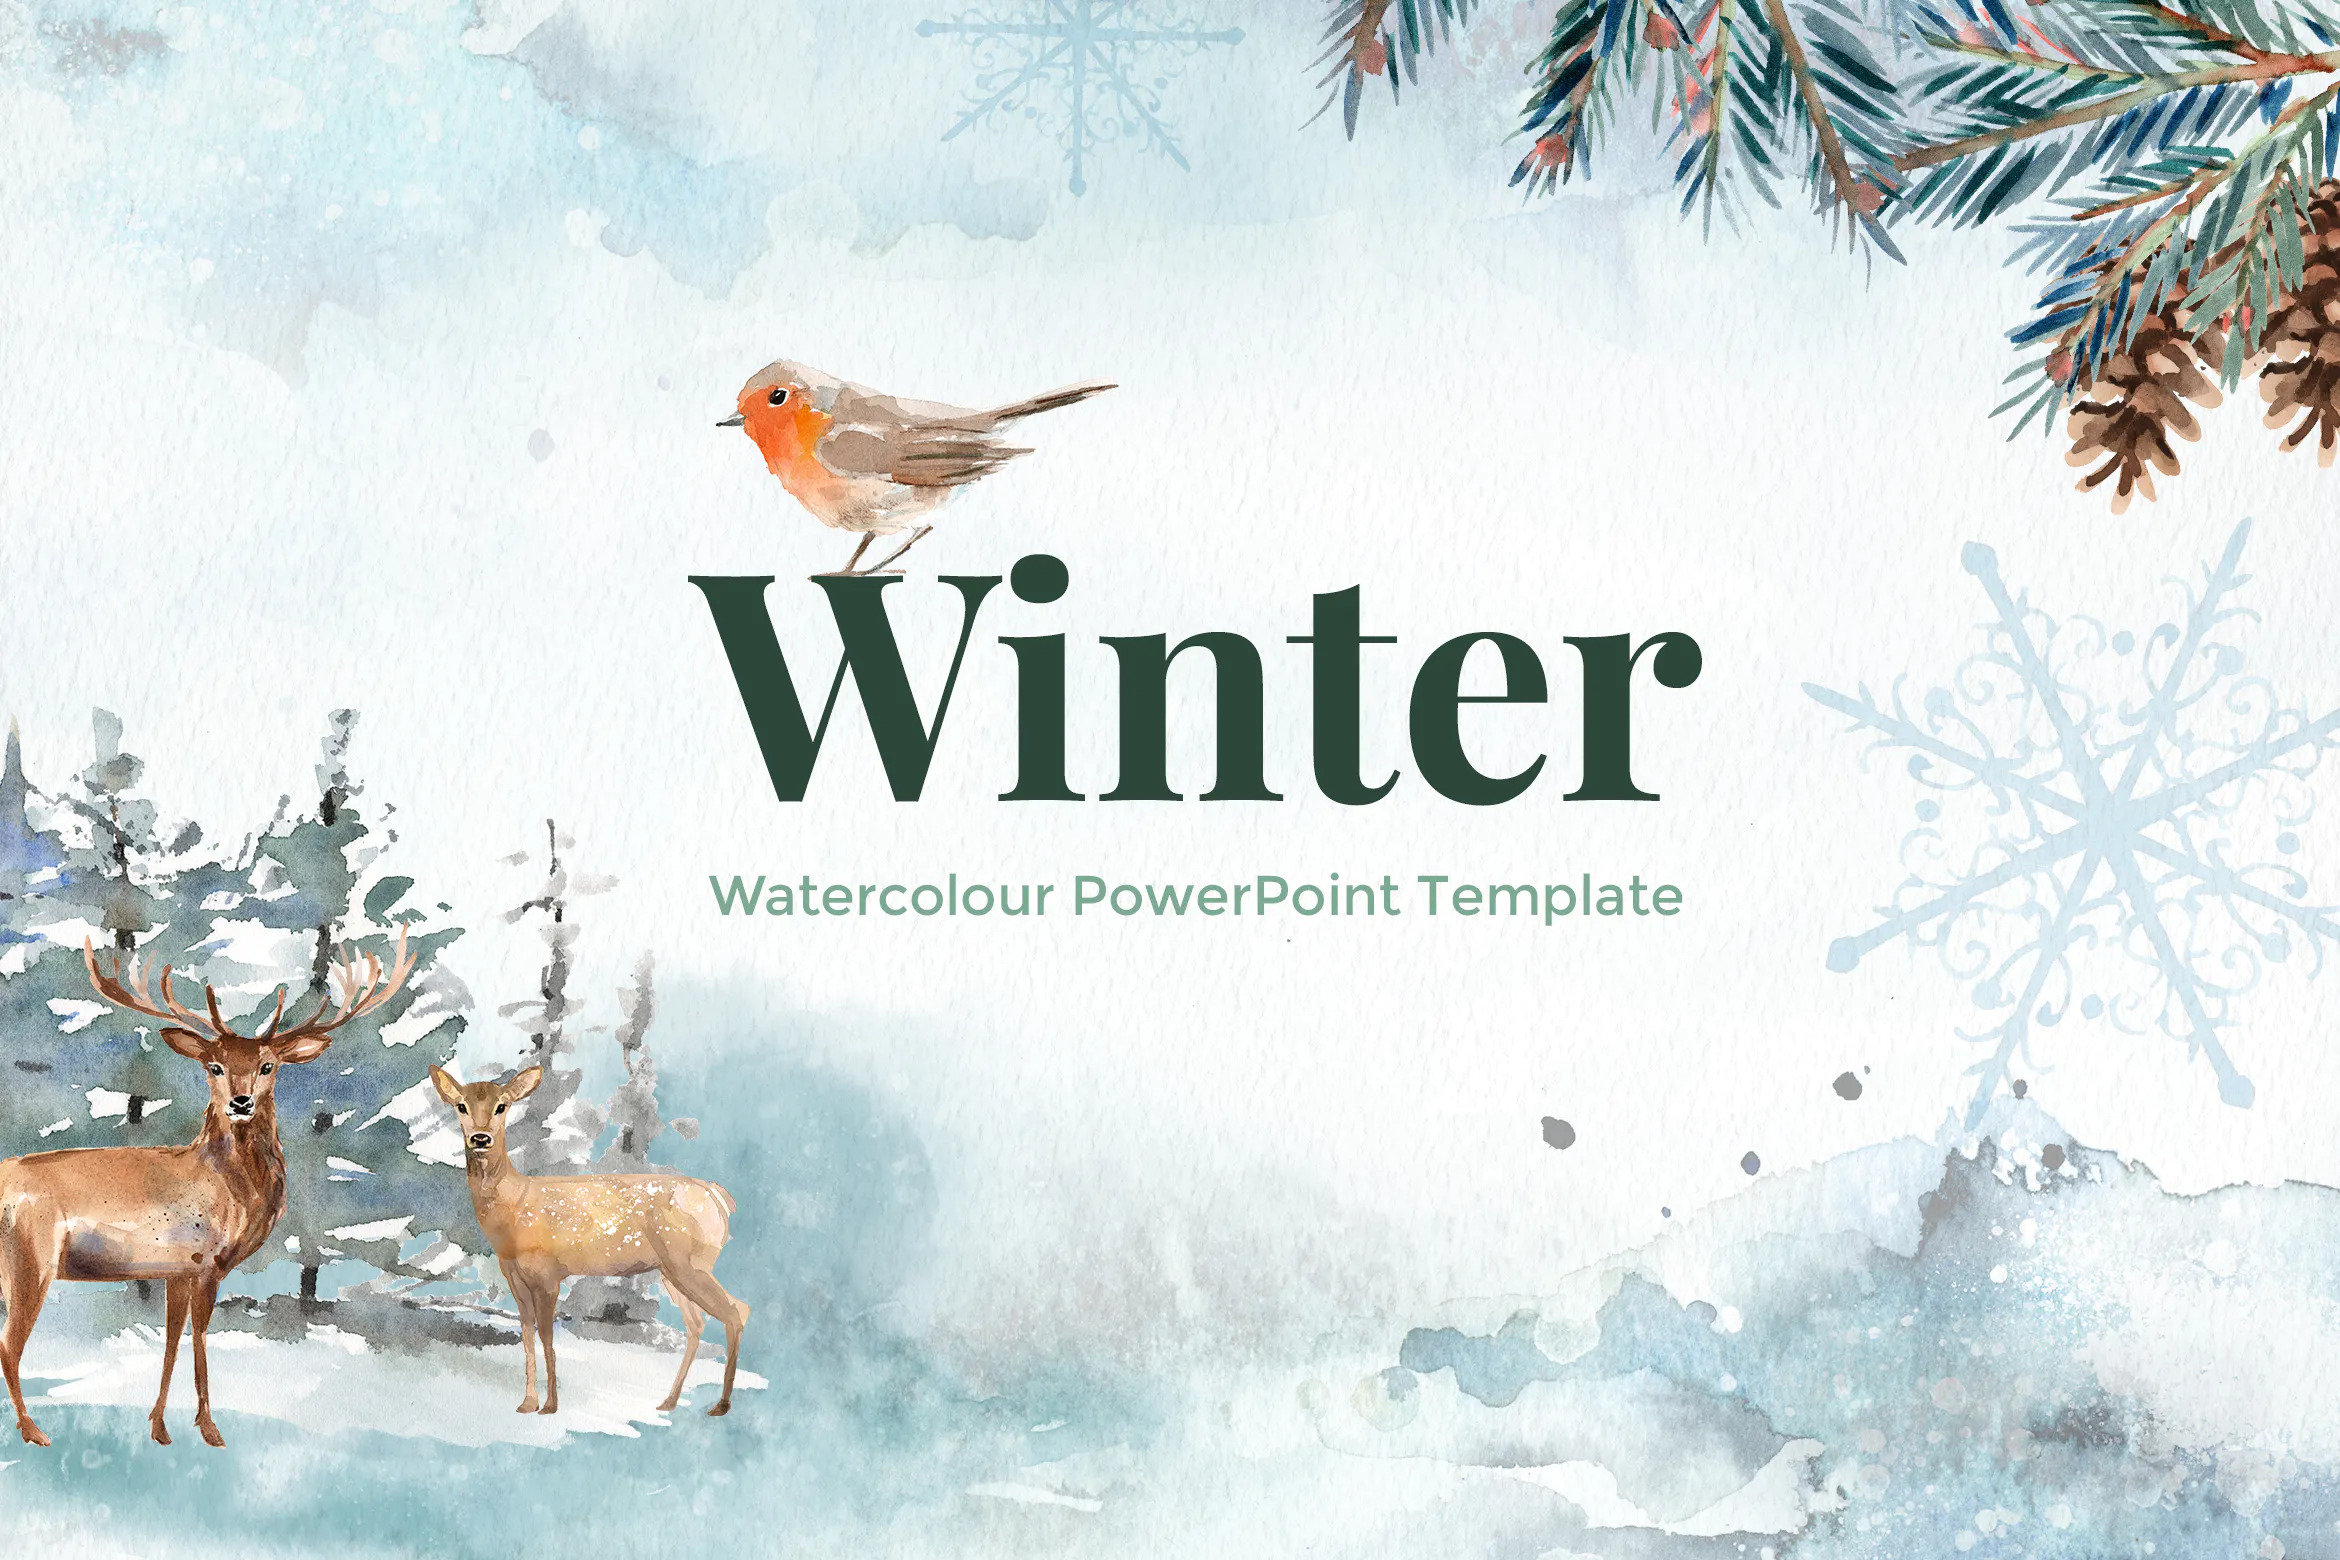 presentation about winter